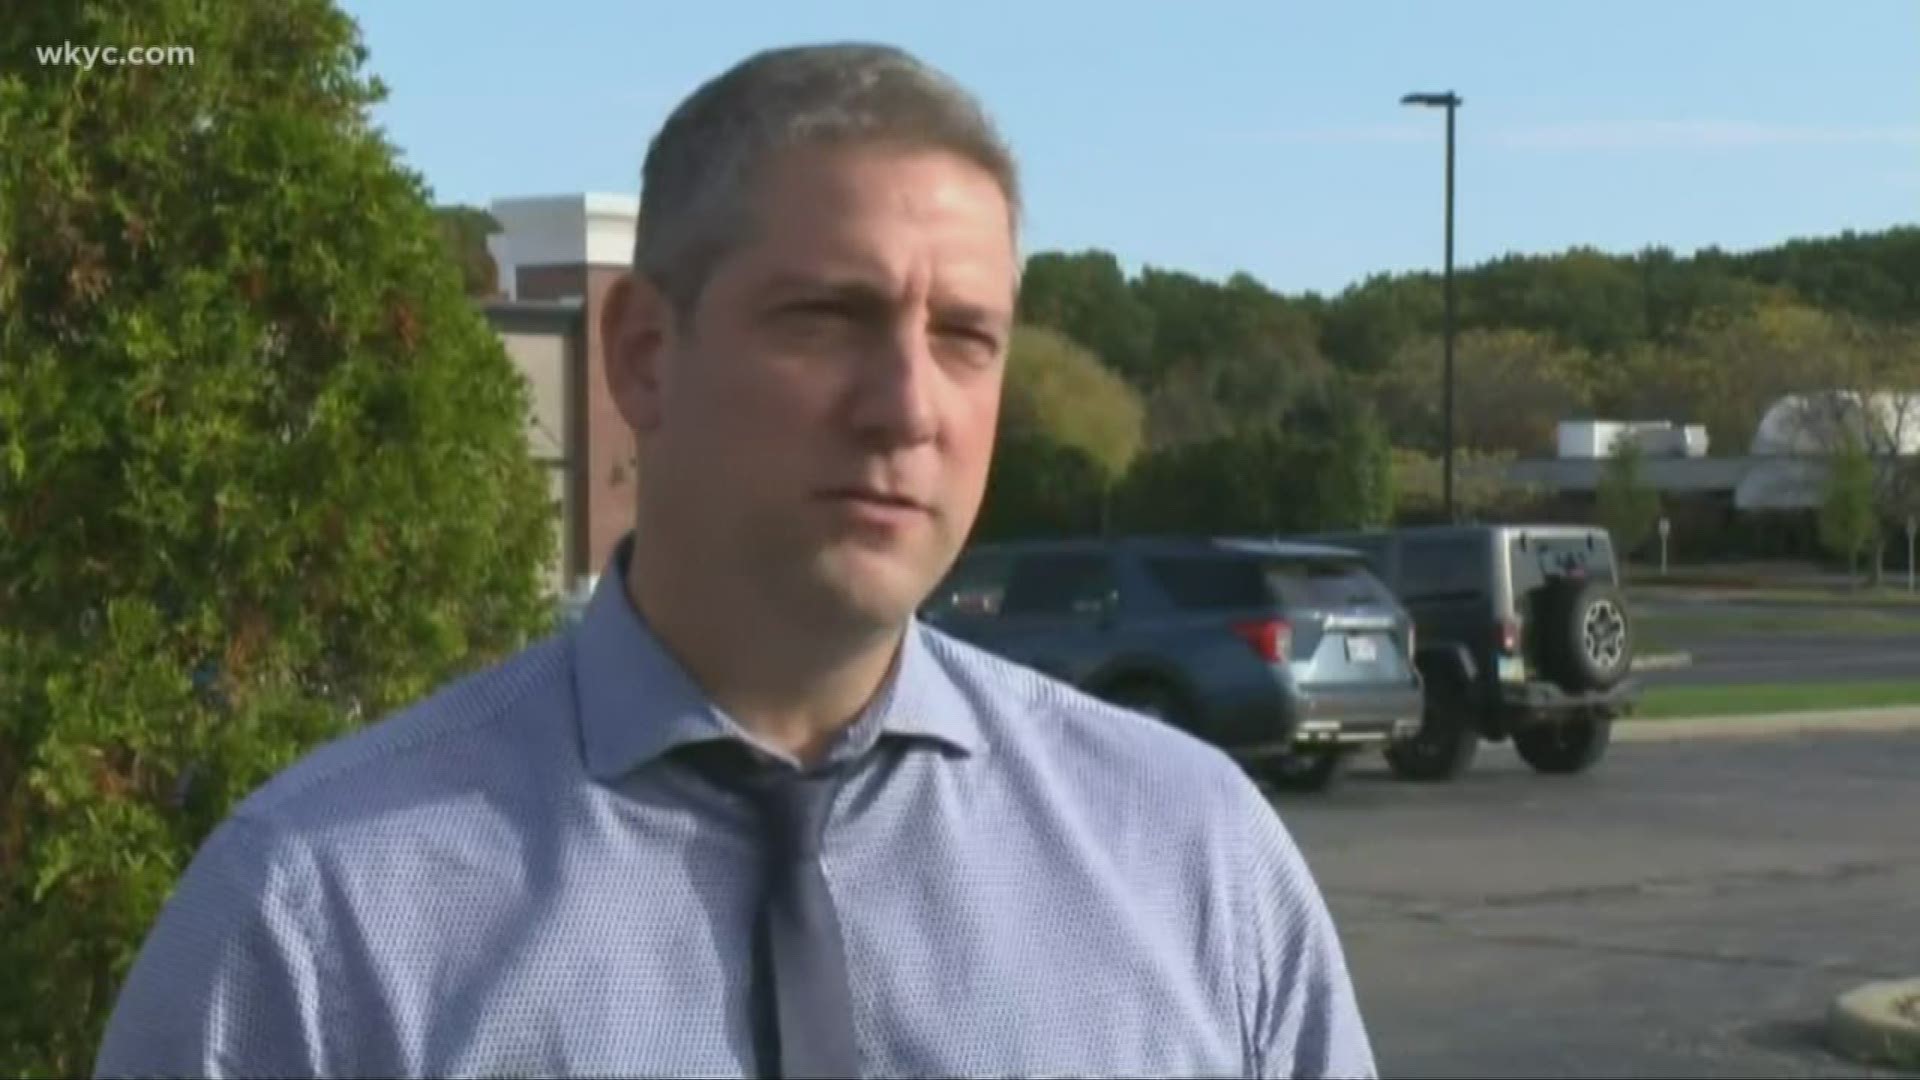 Rep. Tim Ryan has ended his presidential campaign. He announced the decision in a video to his supporters. Ryan said he would be running again for his House seat.